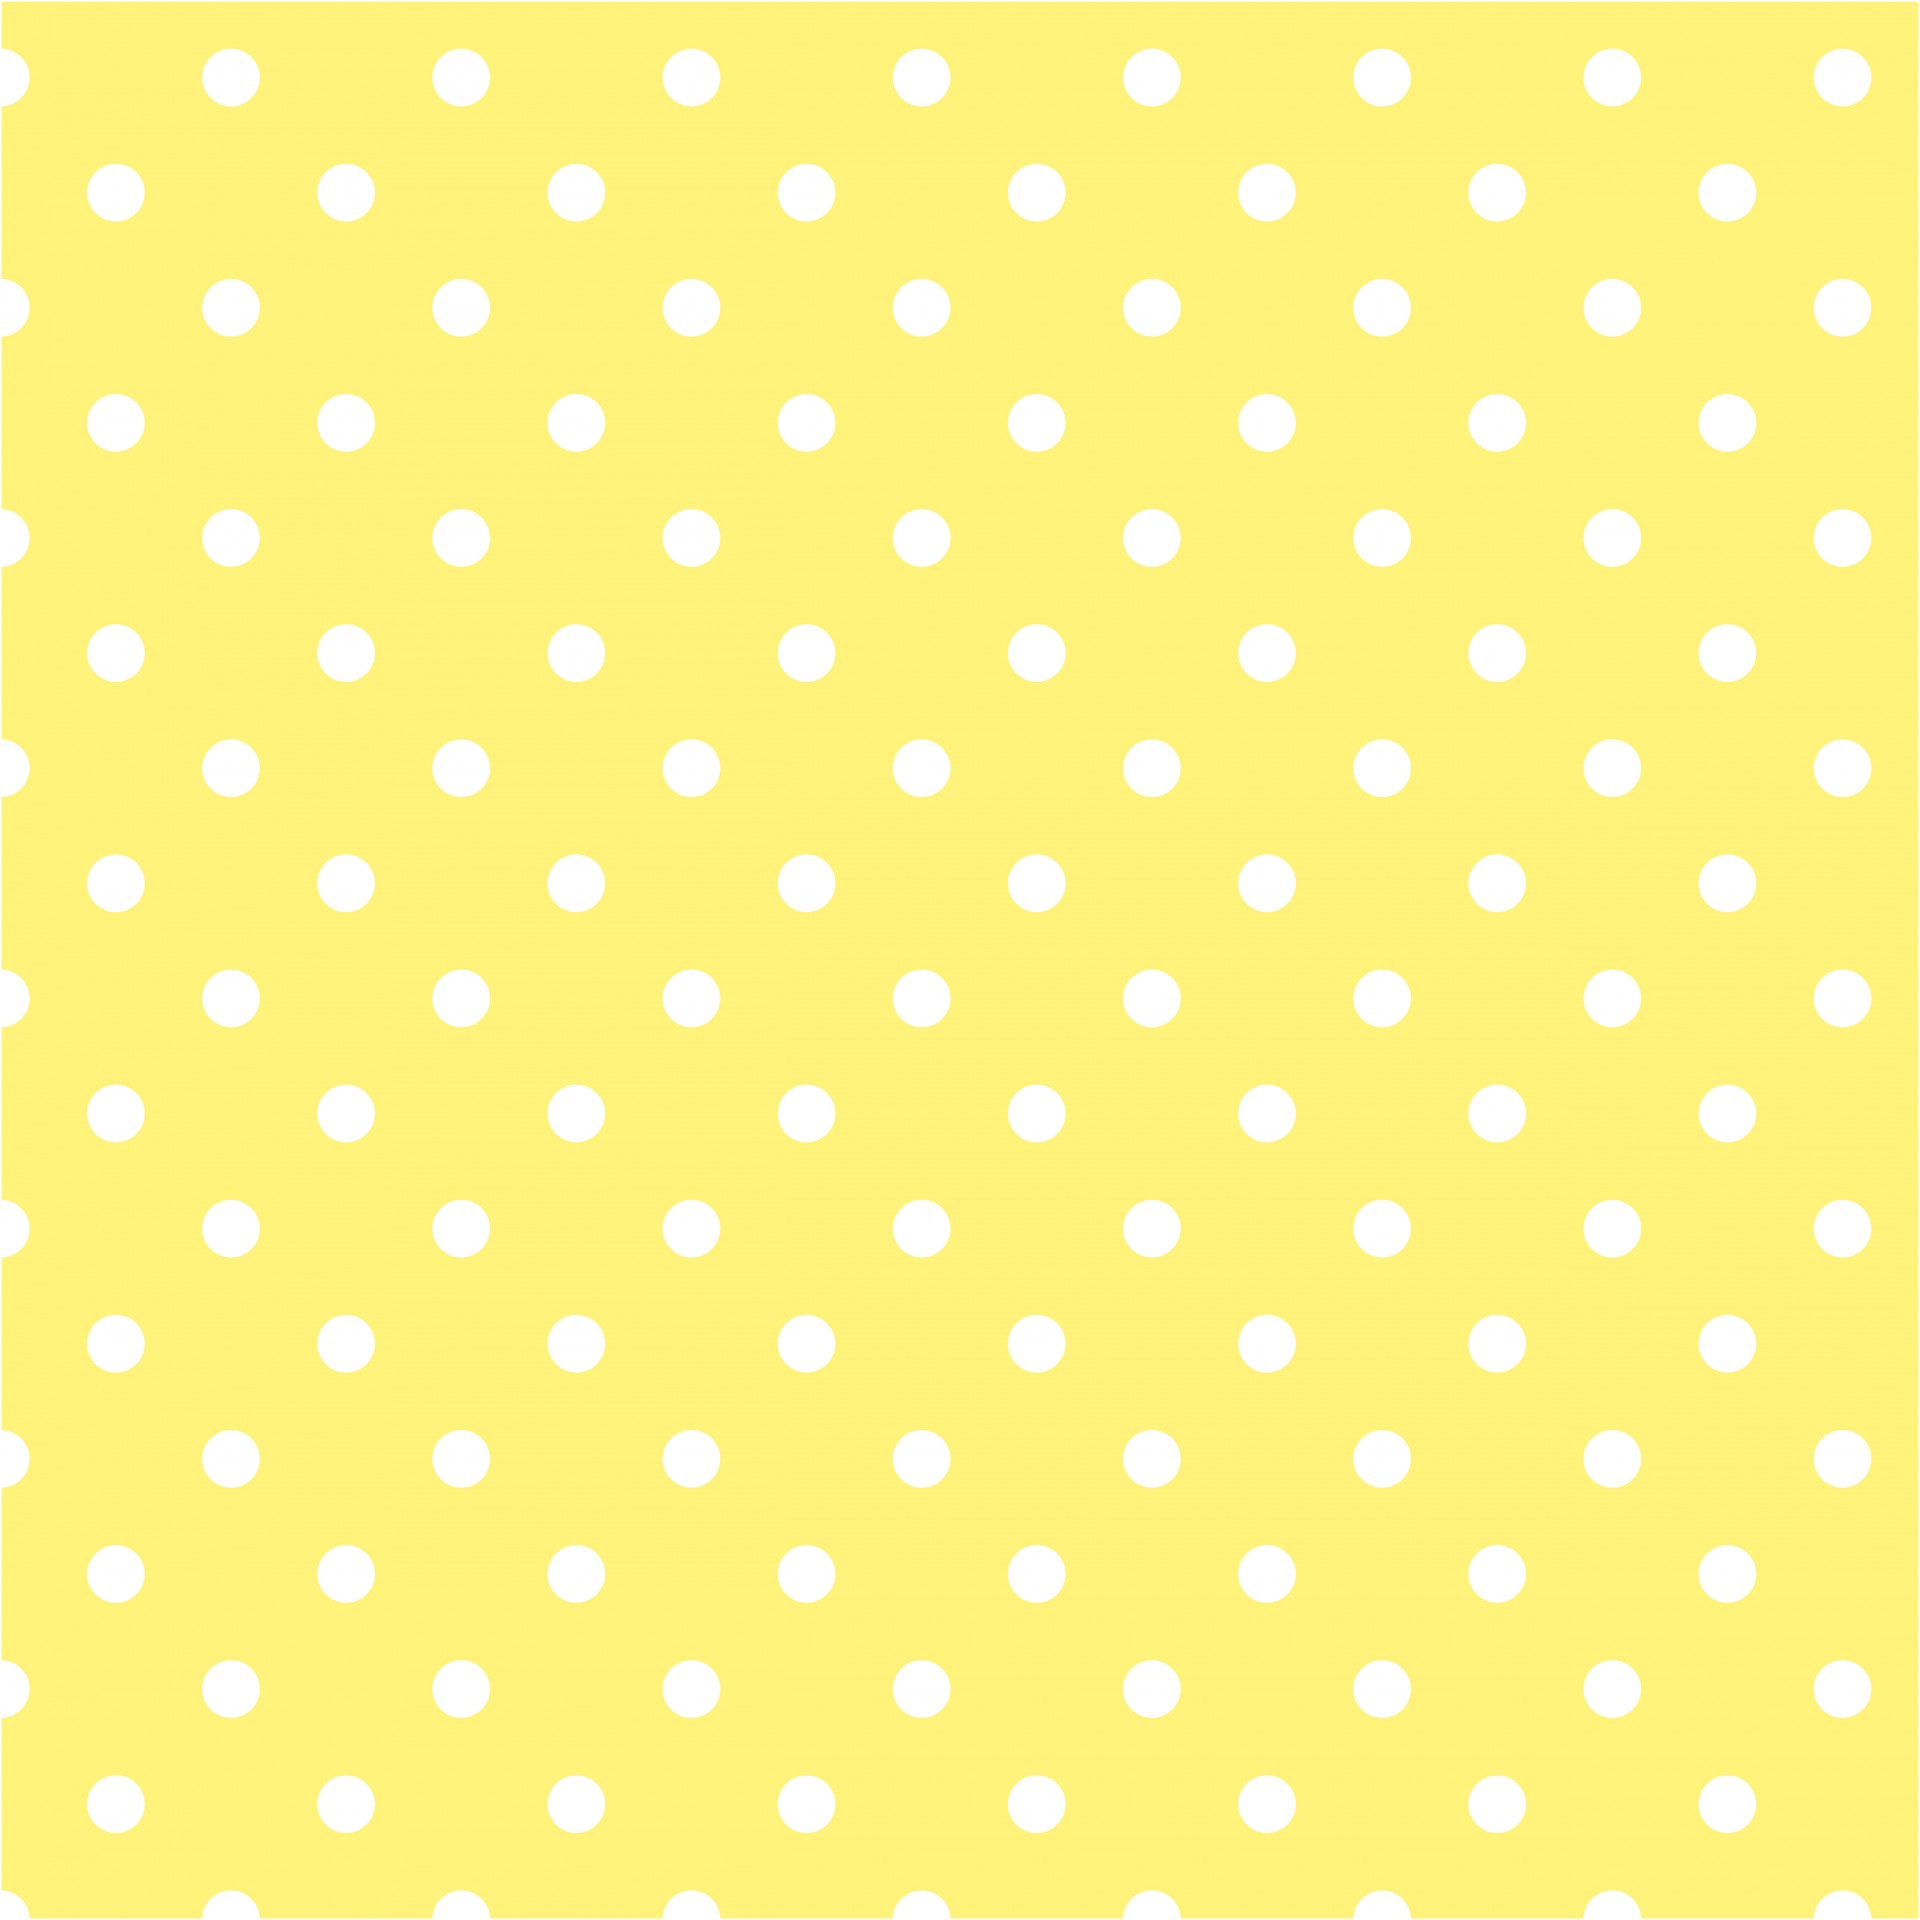 White polka dots on a yellow background of scrapbooking